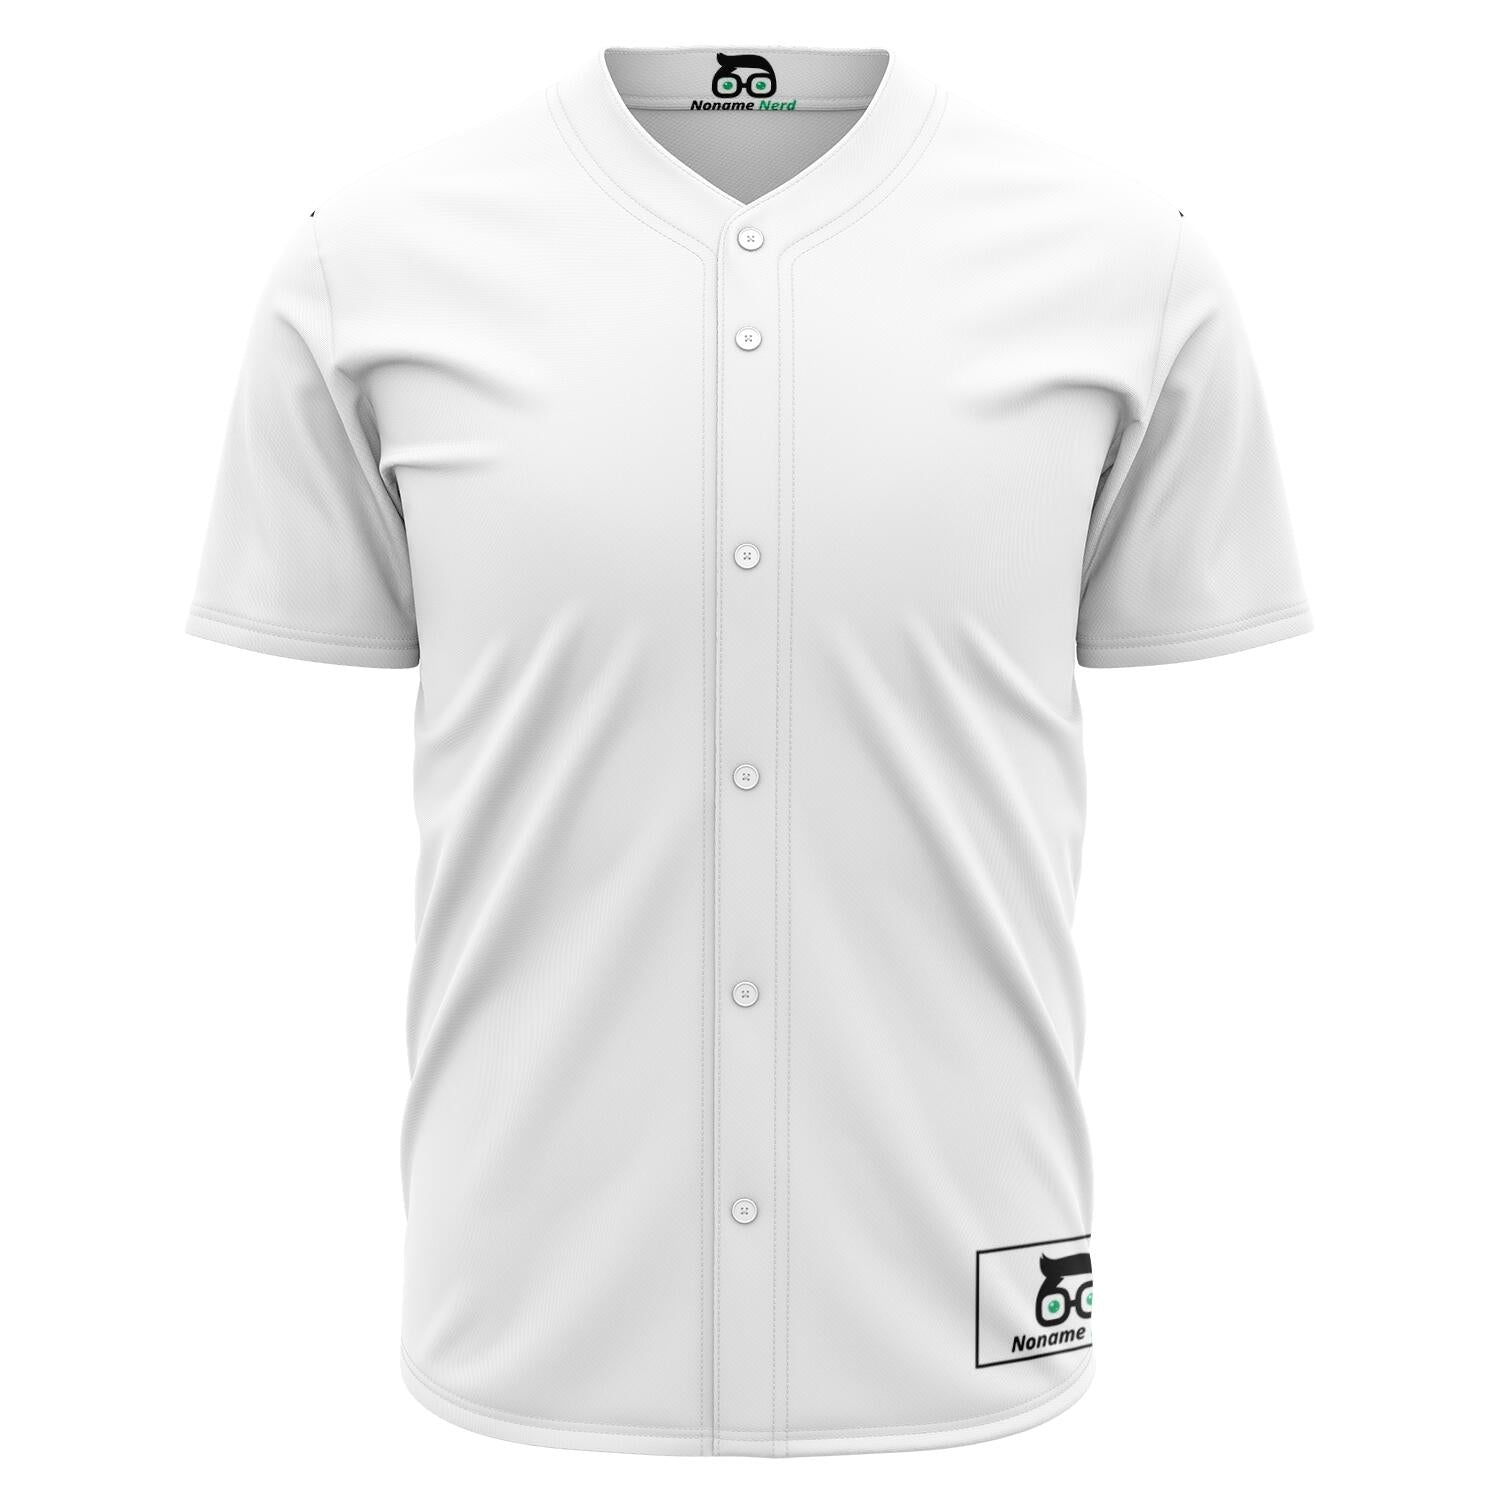 Custom Plain White Gamer Jersey (button down up to 5XL) – The Noname Nerd